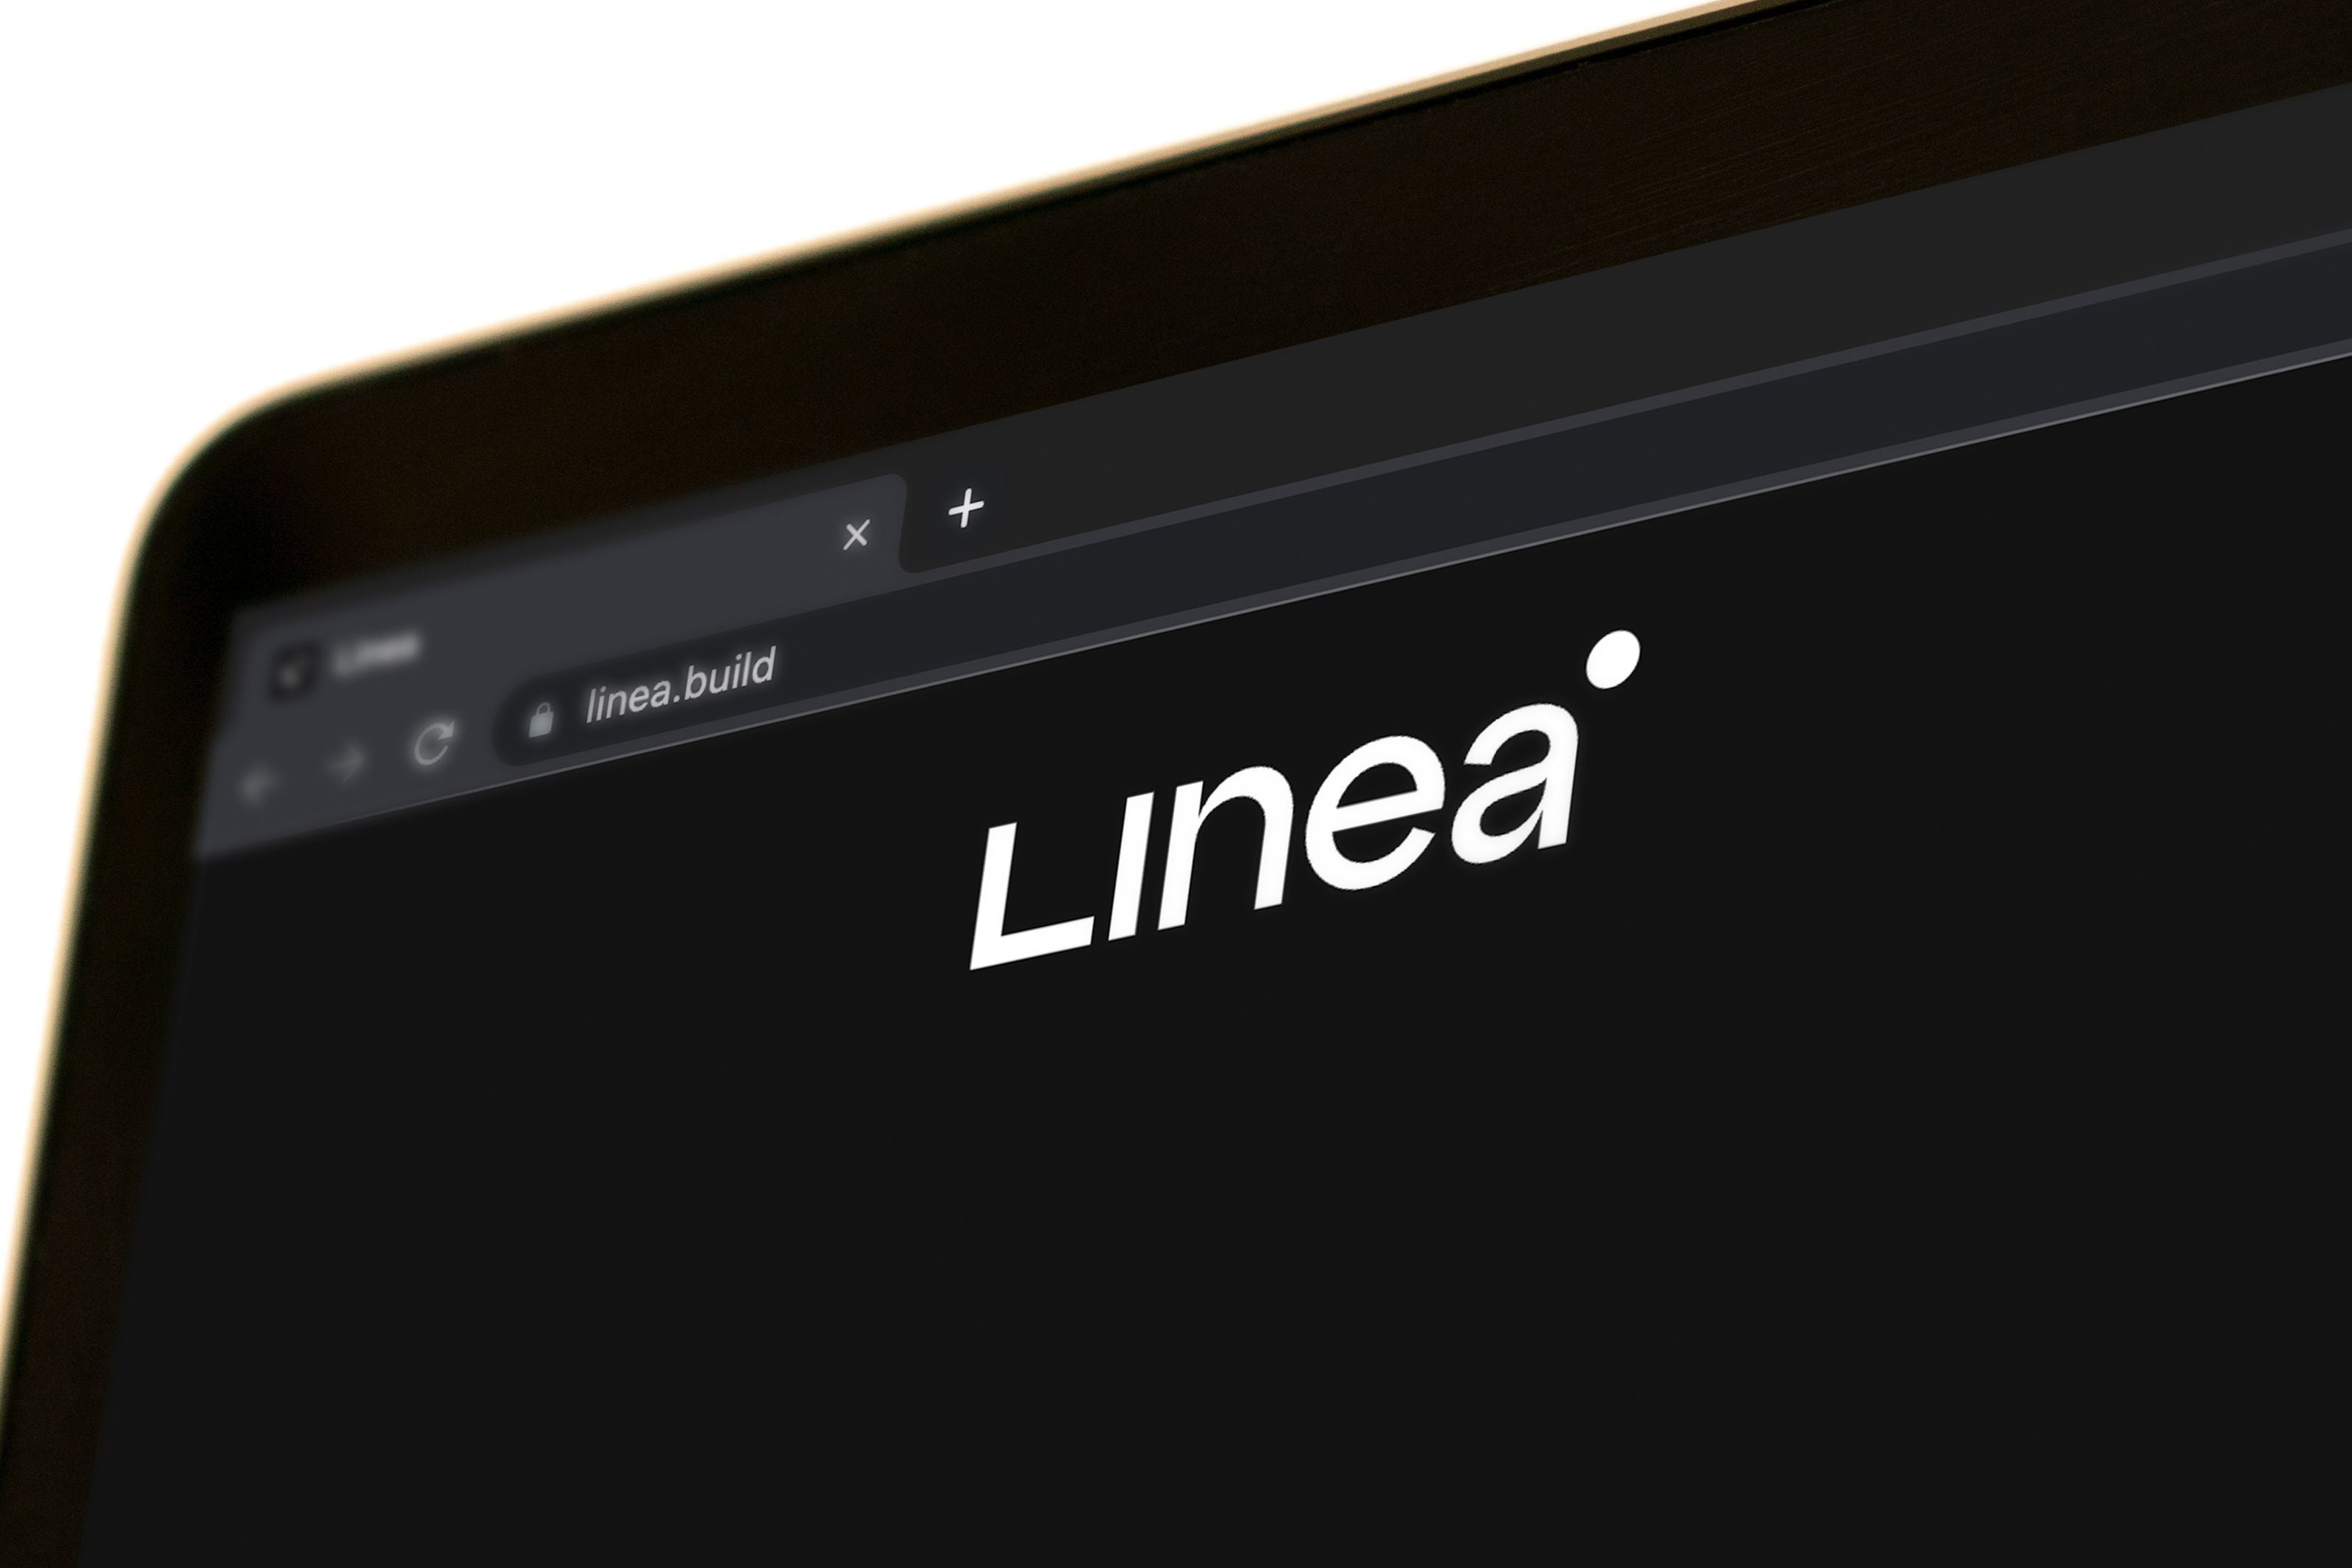 Why Ethereum network Linea hit pause on $1.2bn in user funds